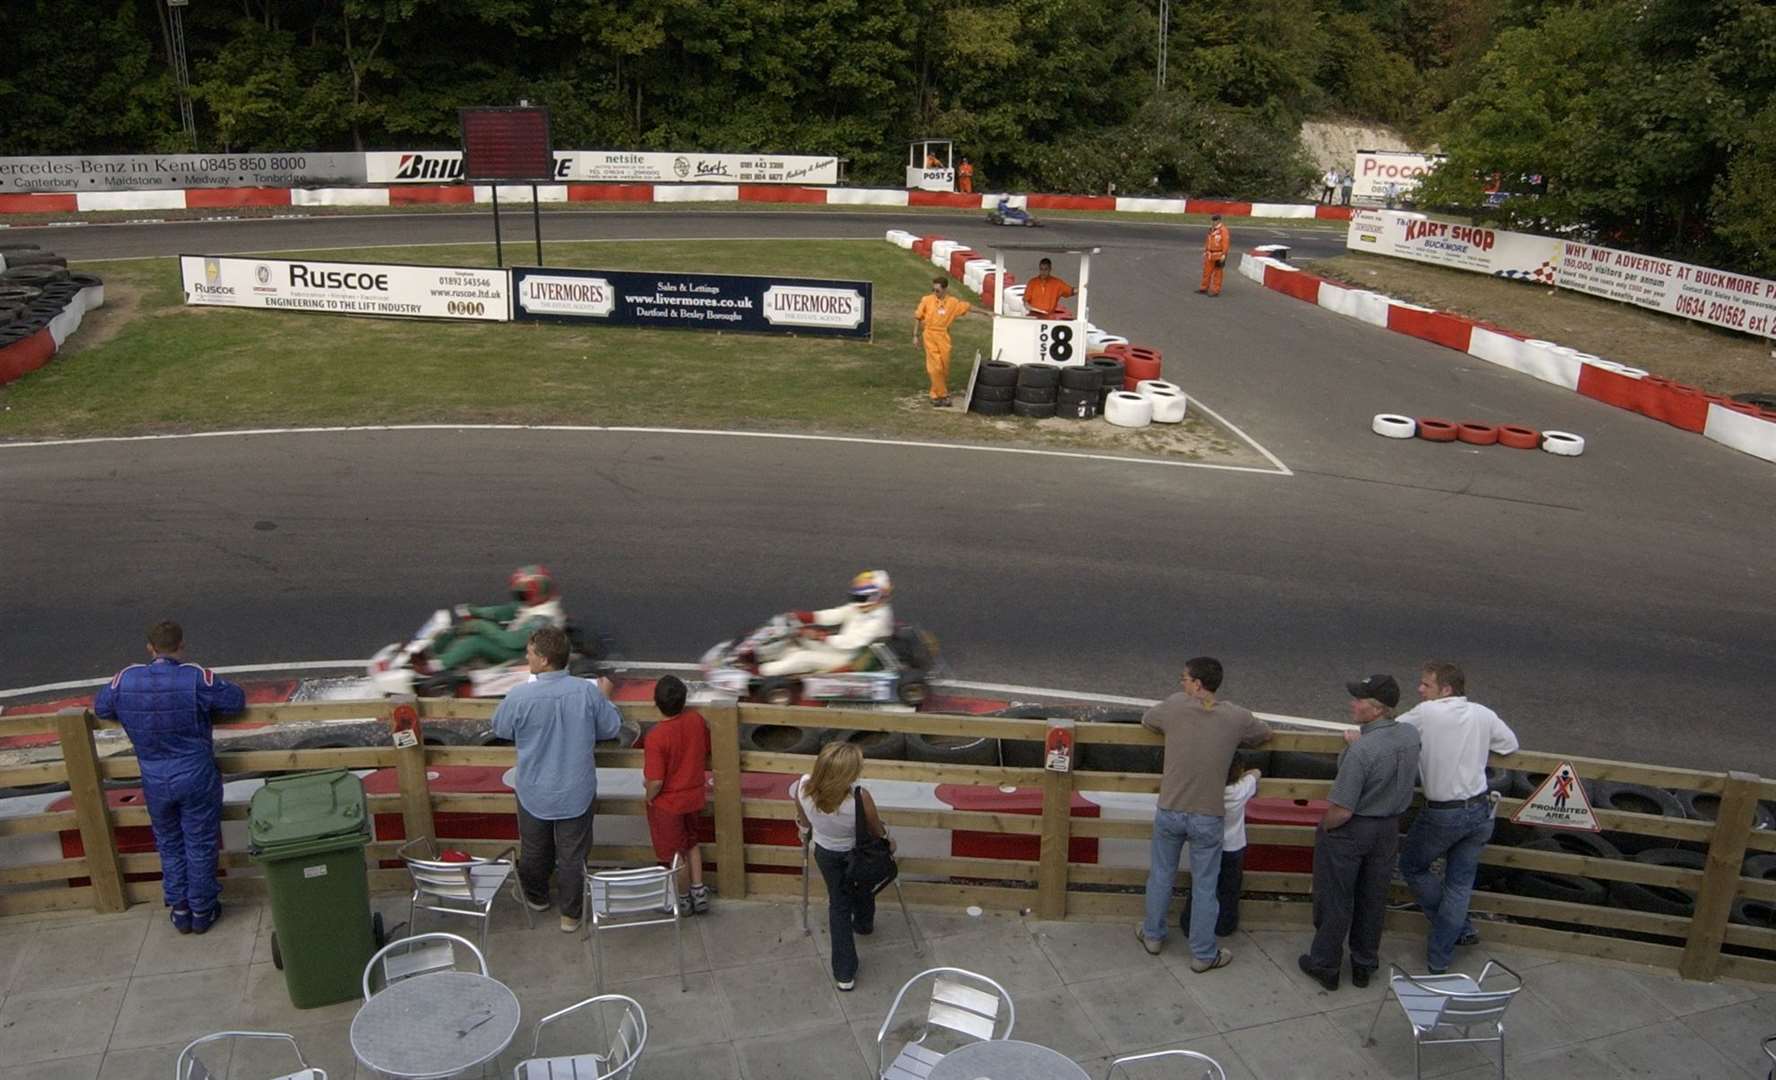 The clubhouse balcony offered great views of the circuit, with spectators looking down on the fast Cafe Curve turn